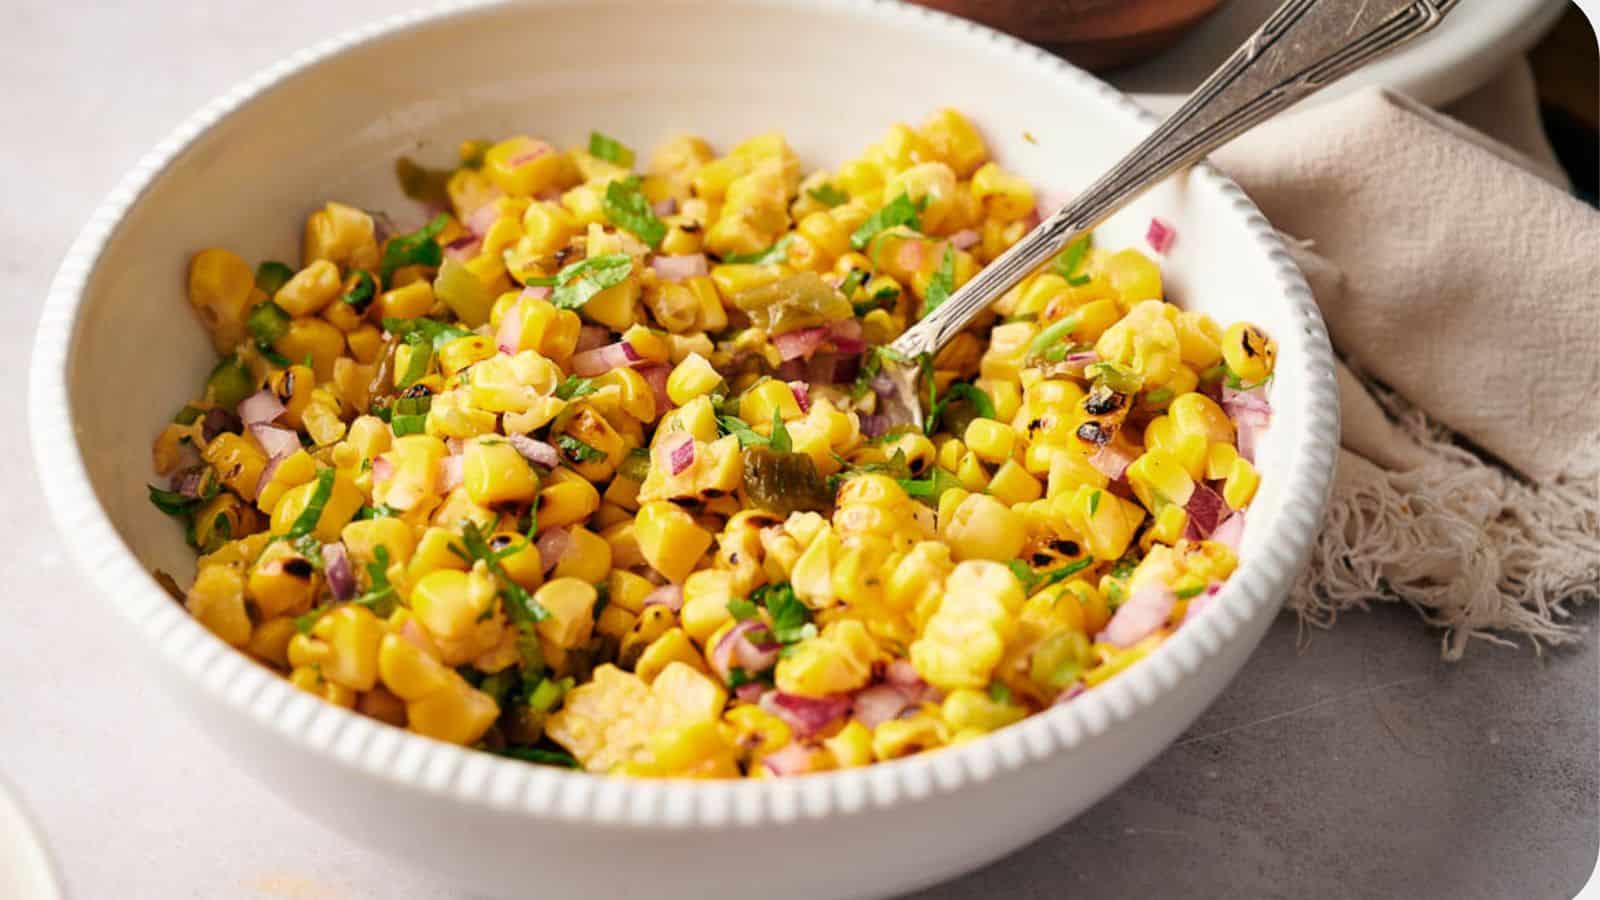 <p>Level up your meals with Copycat Chipotle Corn Salsa, a simple and affordable way to enjoy restaurant-style freshness at home. This recipe lets you replicate the goodness of your favorite salsa without spending extra money. Perfect for enhancing your dishes, this corn salsa proves that you can add a burst of flavor to your meals without breaking the bank.<br><strong>Get the Recipe: </strong><a href="https://www.splashoftaste.com/chipotle-corn-salsa/?utm_source=msn&utm_medium=page&utm_campaign=msn">Copycat Chipotle Corn Salsa</a></p>